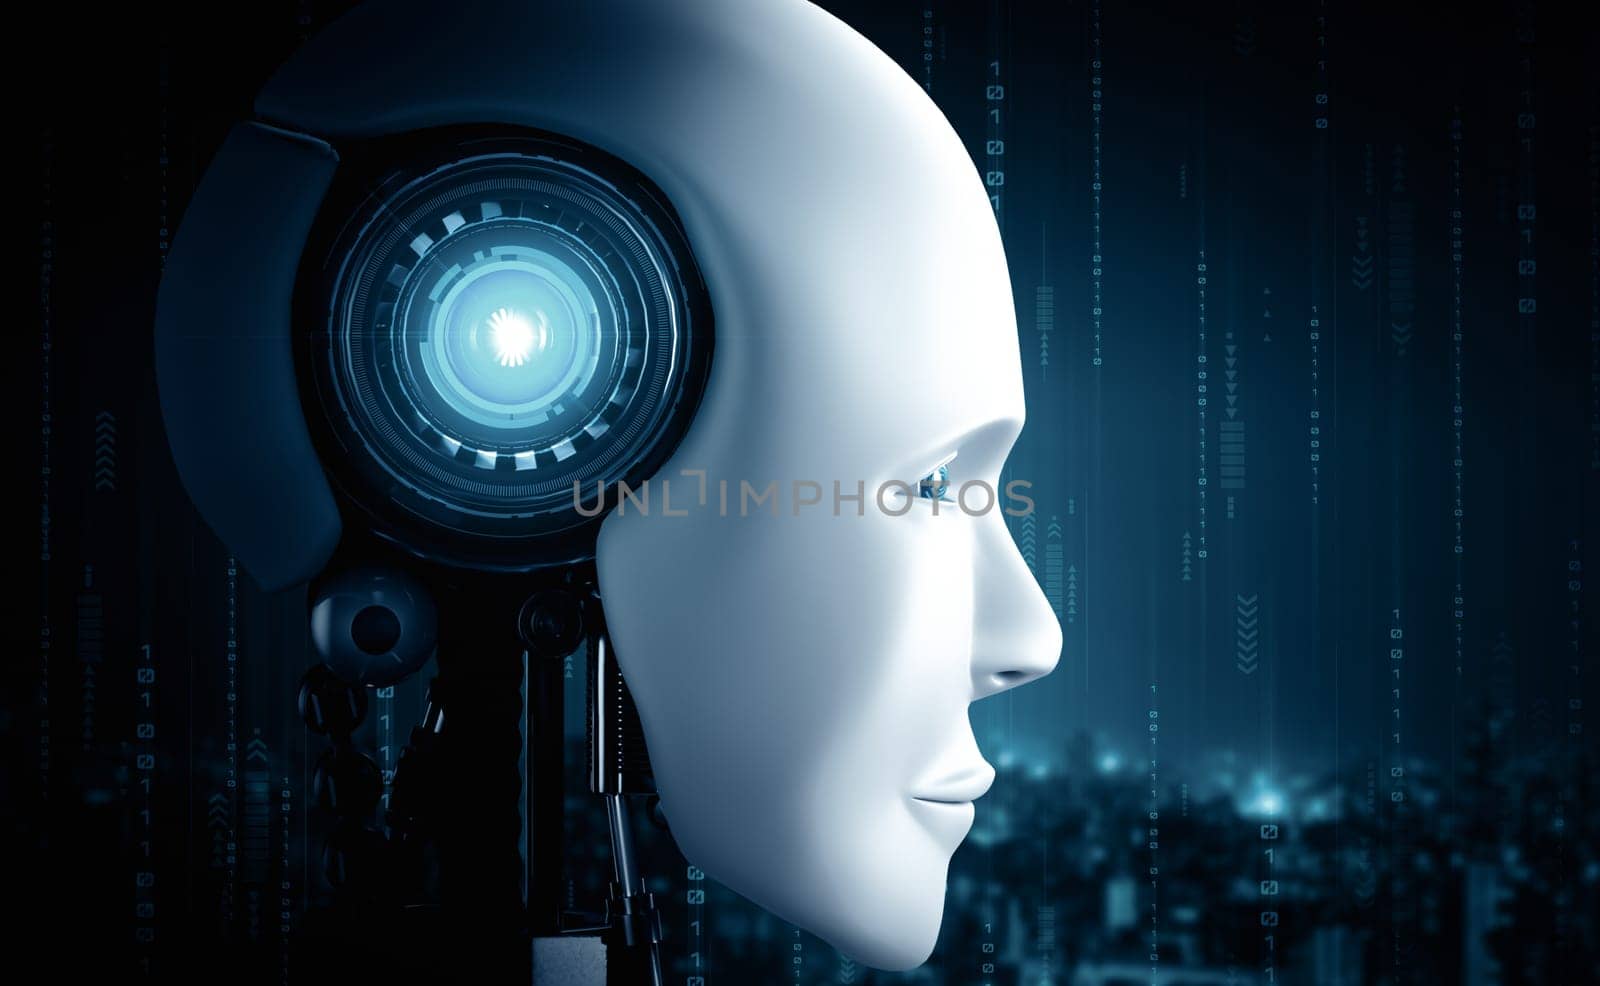 XAI 3d illustration Robot humanoid face close up with graphic concept of AI thinking brain , artificial intelligence and machine learning process for the 4th fourth industrial revolution. 3D rendering